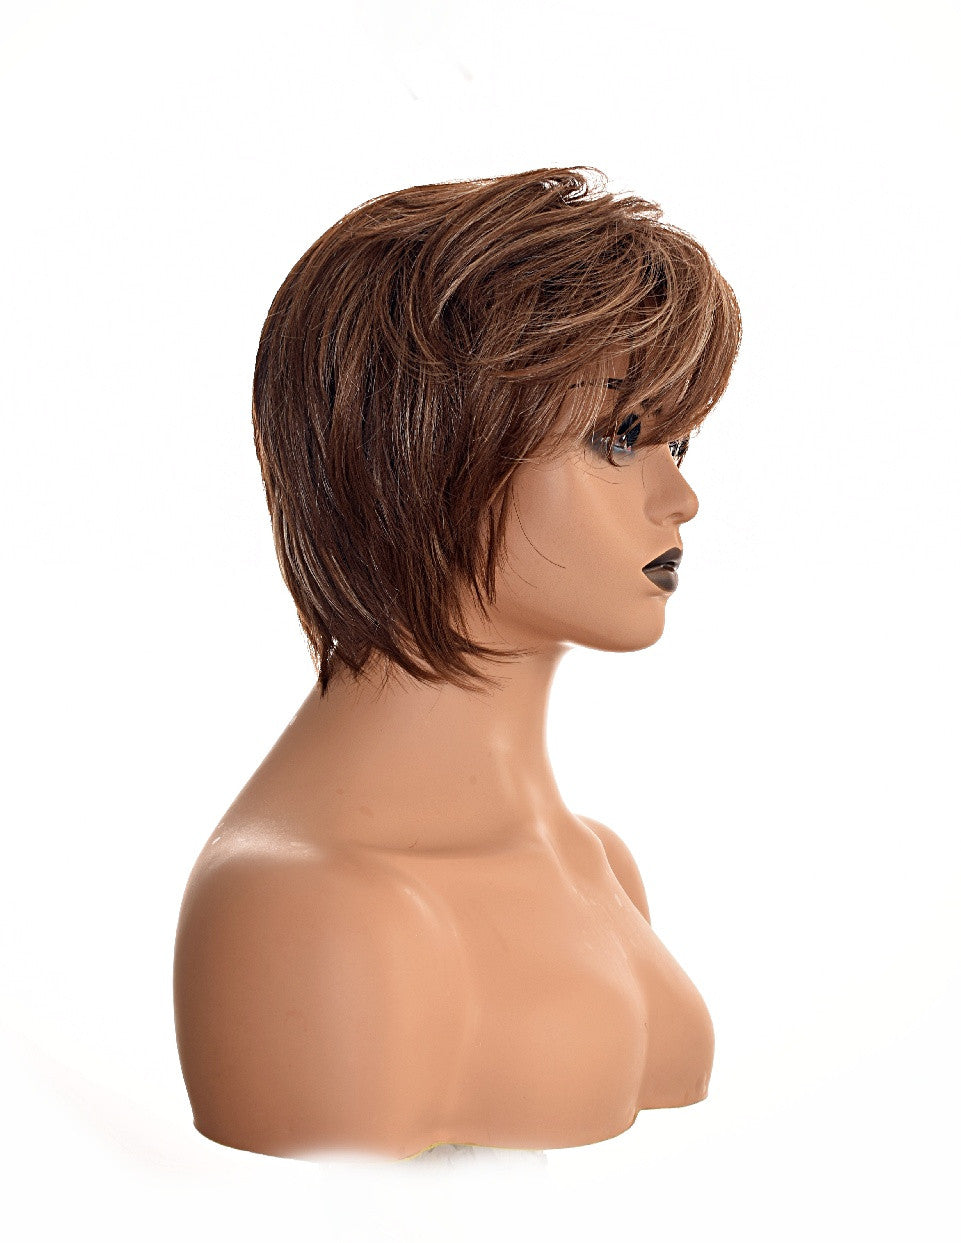 Short Chic Pageboy Brown with Blonde Highlights Wig.